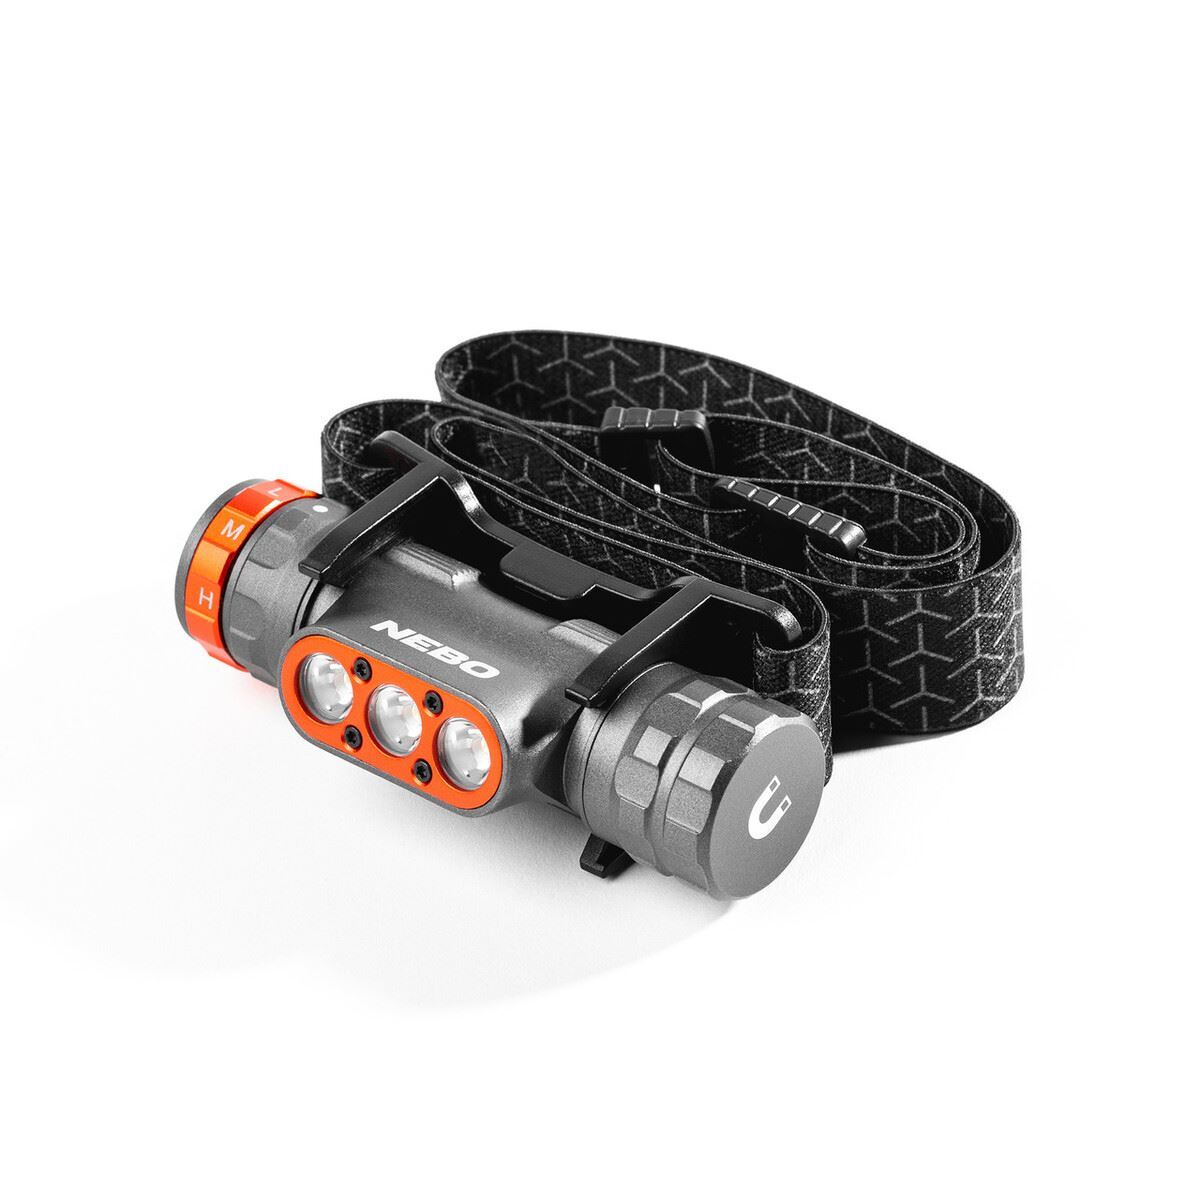 Nebo Transcend TM1500 Rechargeable Headlamp Outback Equipment